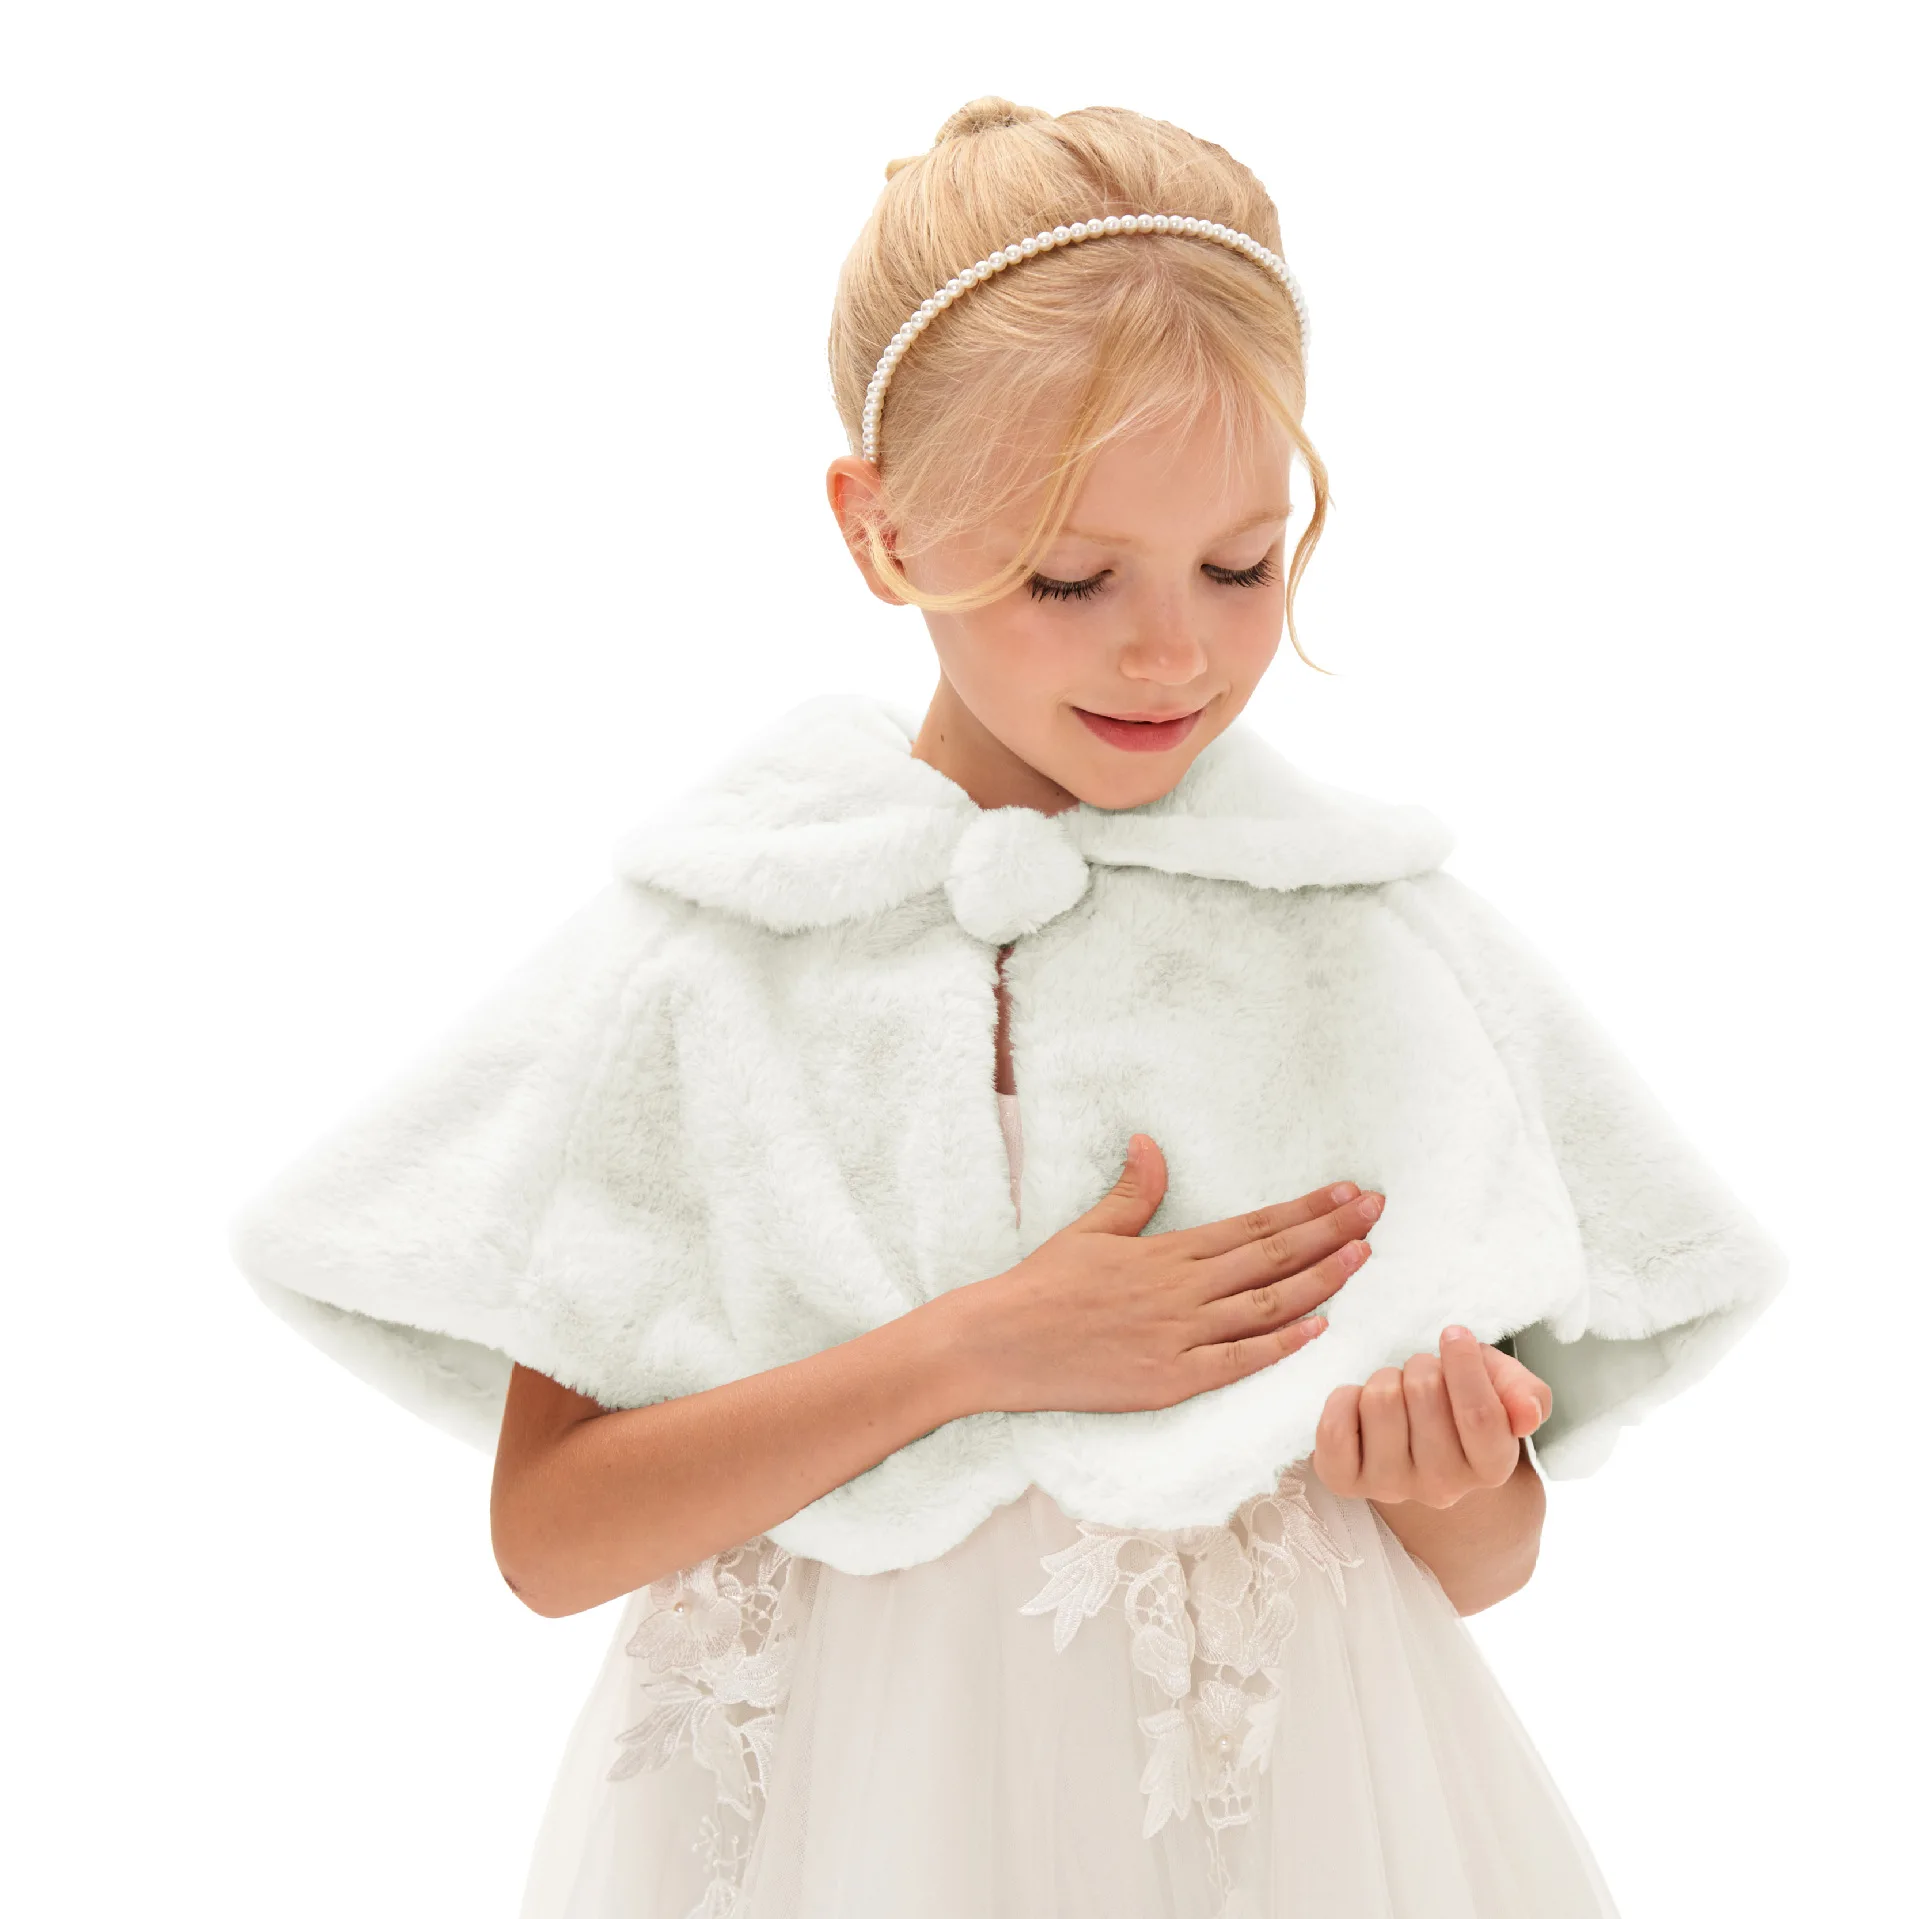 

Toddler Girl Outwear Baby Girl Coats Without Dress Kids Faux Fur Warm Short Jacket for Wedding Party Formal Girls Bolero Cover